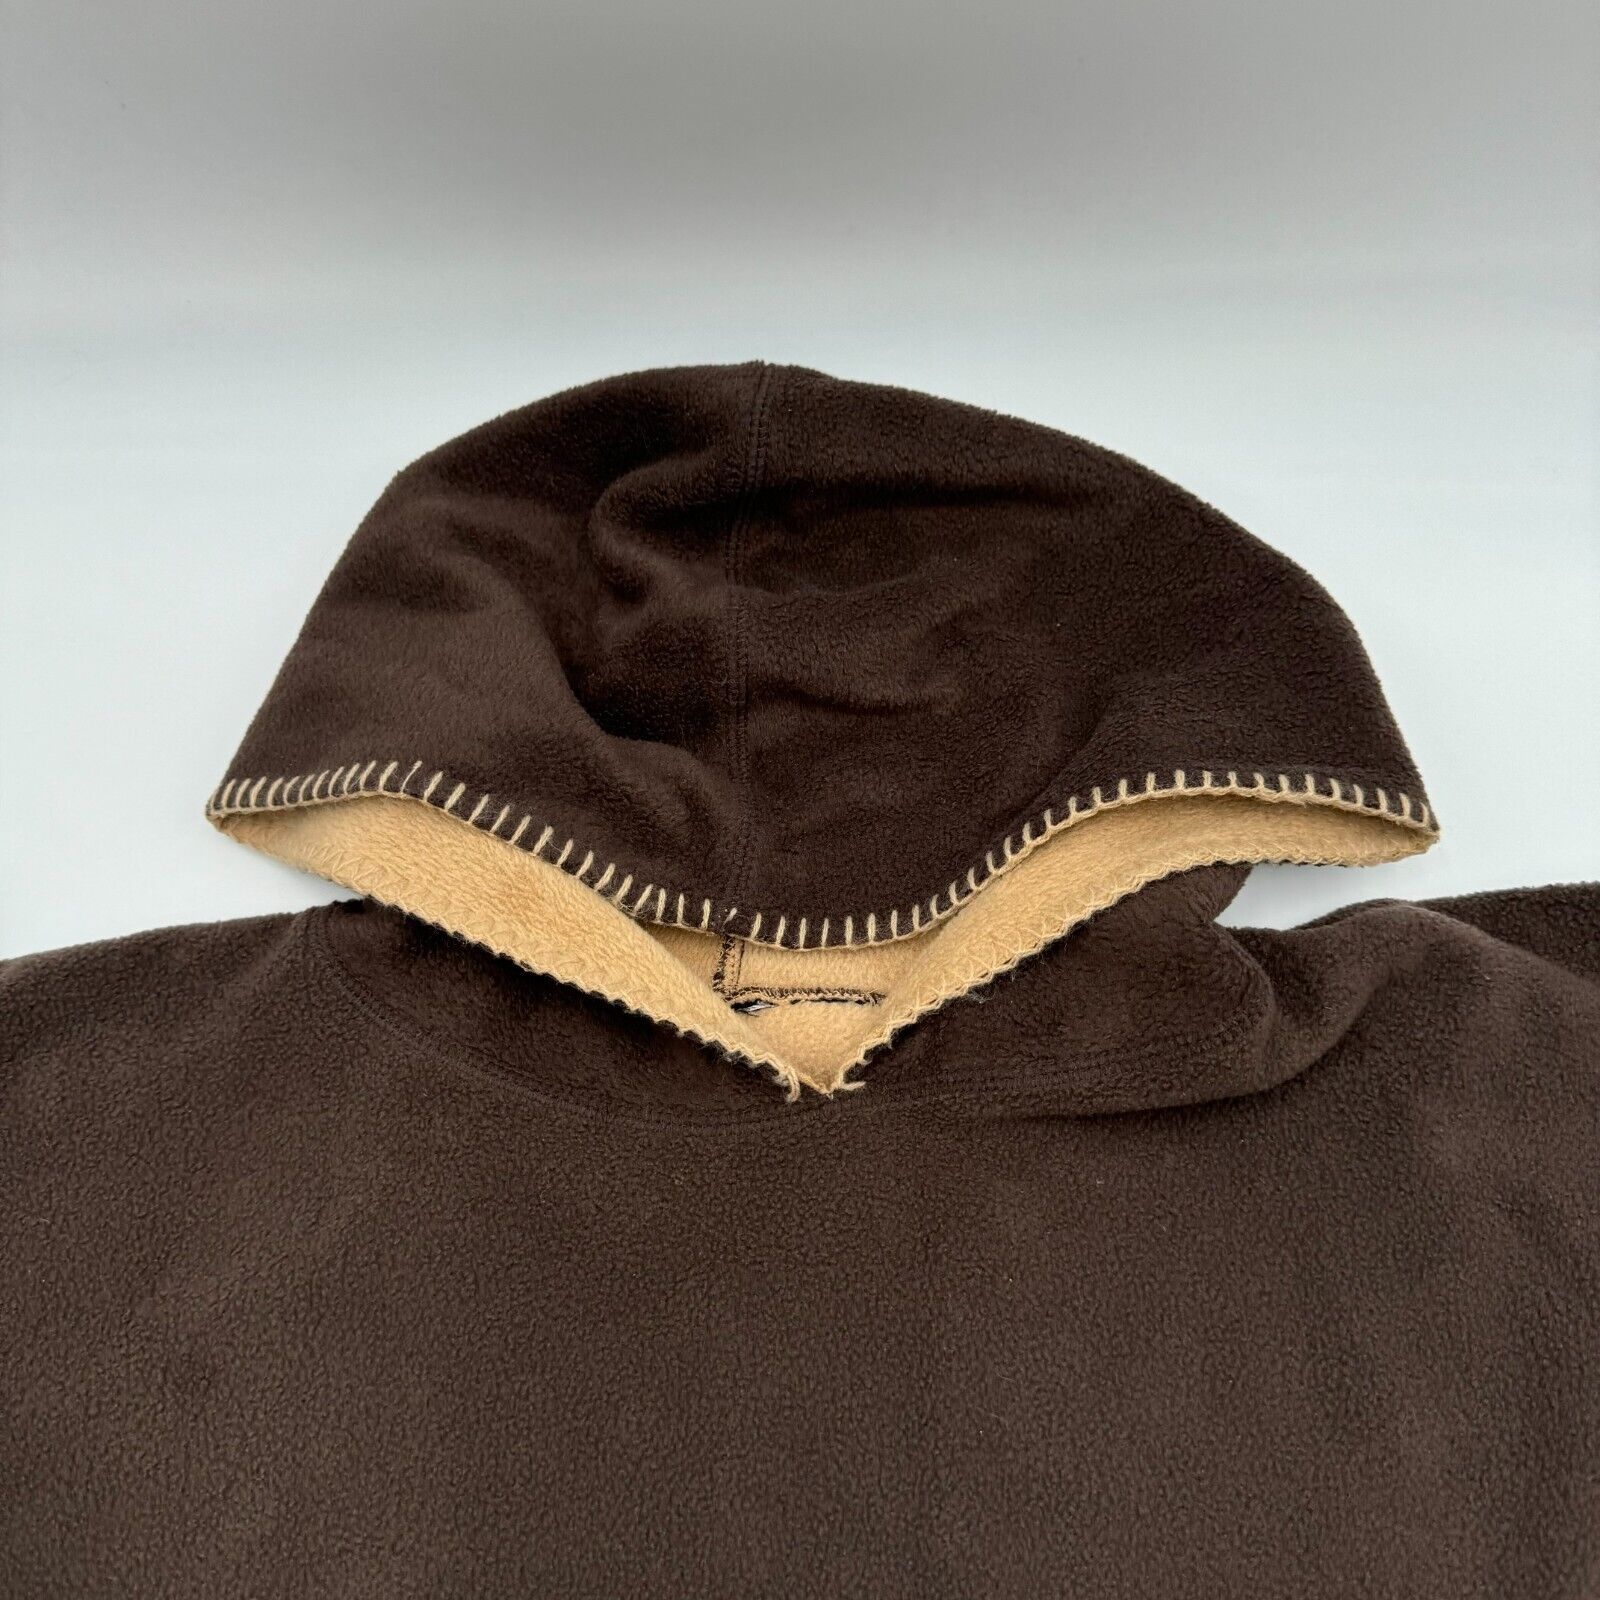 Fleece Poncho Unisex One Size 45W x 30L Brown Tan Pull over Hooded Soft Warm